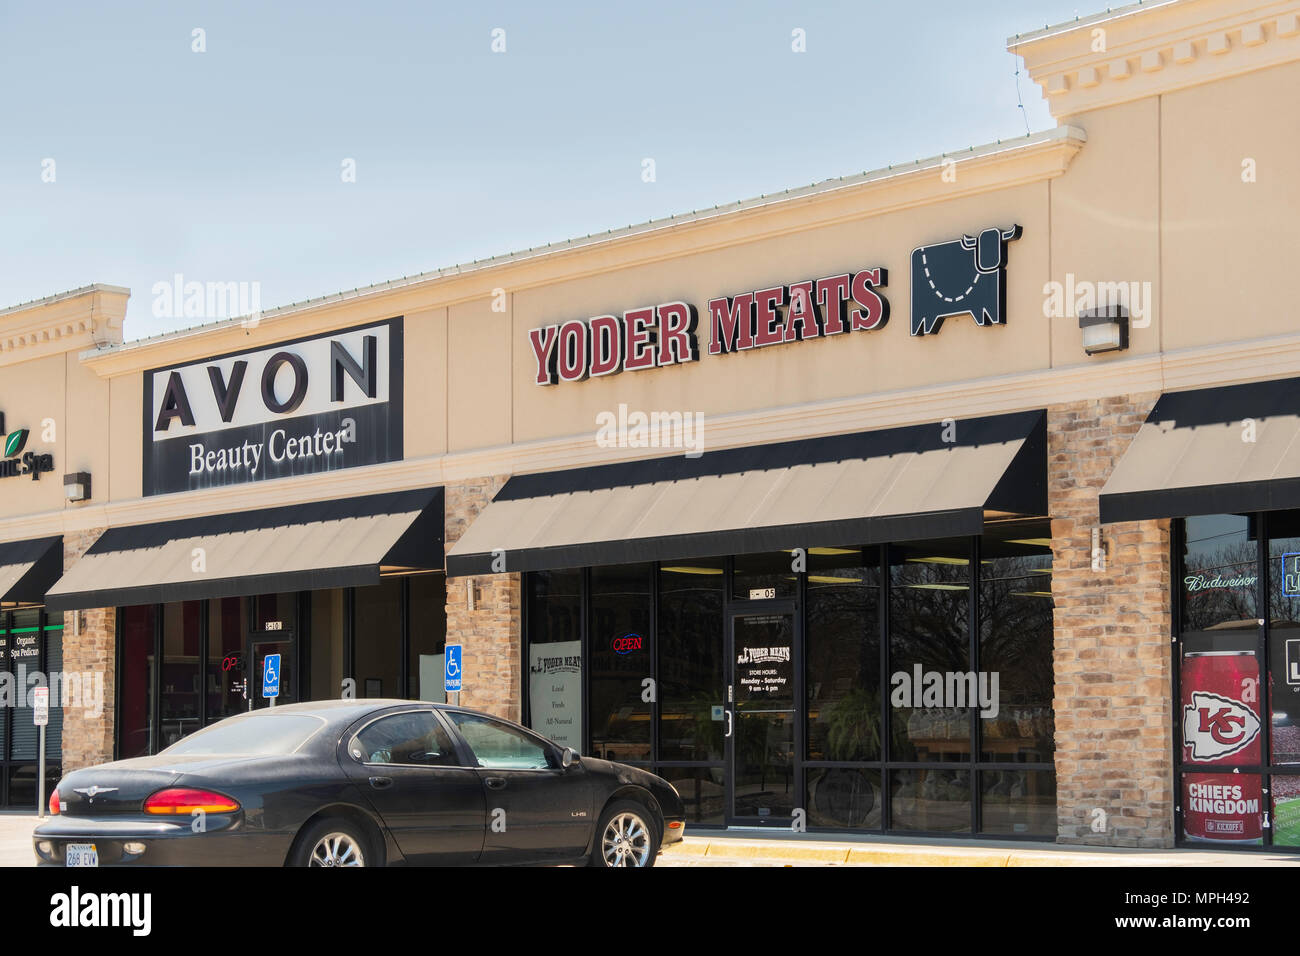 A strip mall containing a butcher shop or meat market, and Avon Beauty Center in Wichita, Kansas, USA. Stock Photo